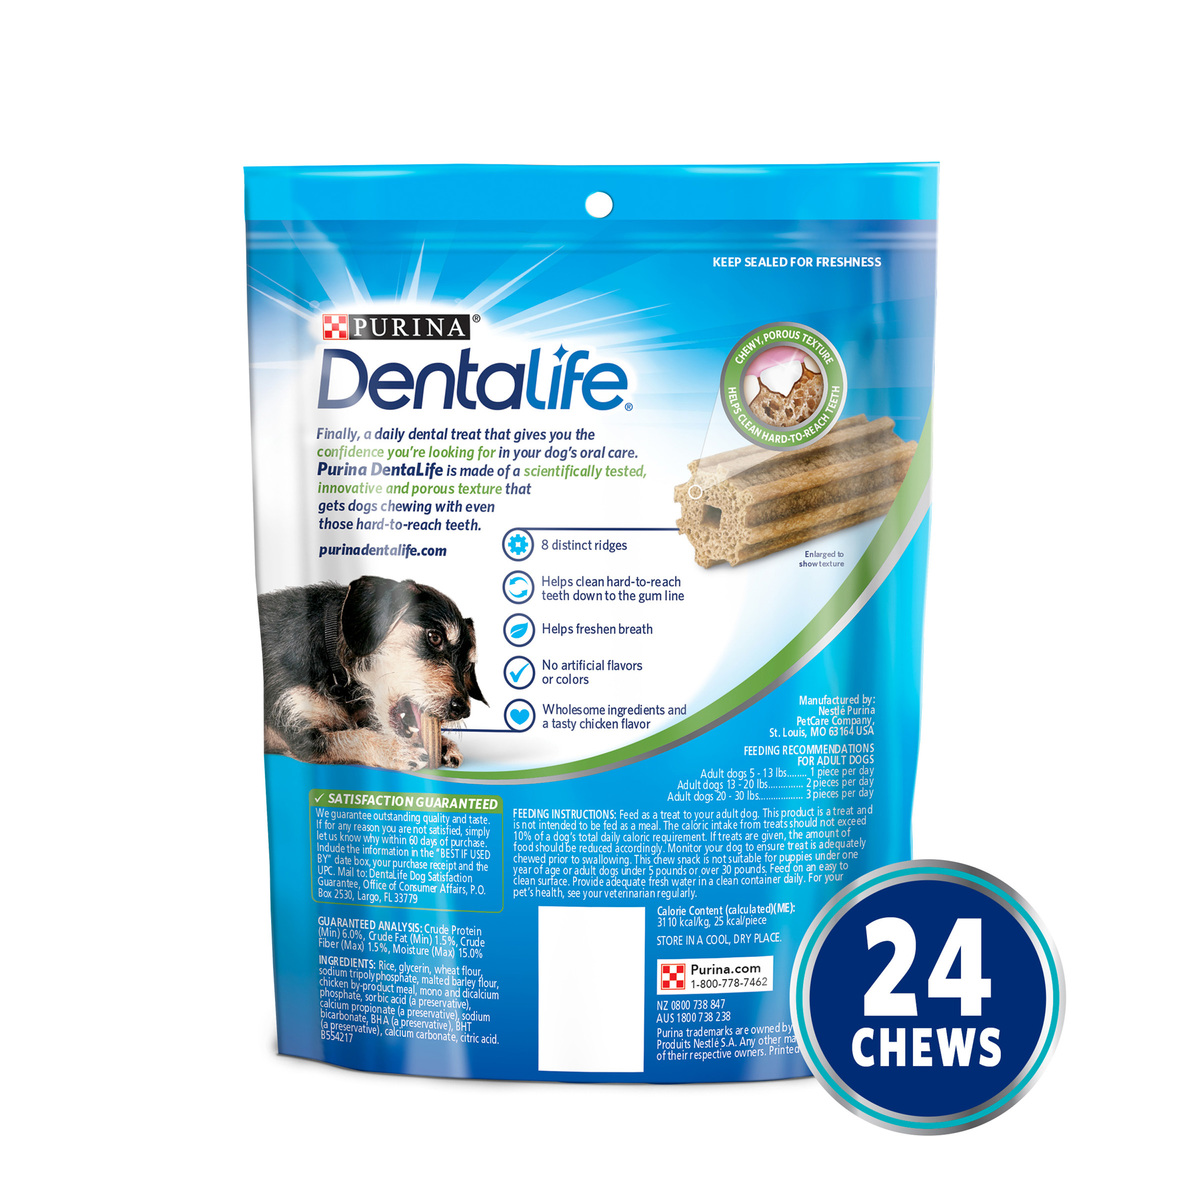 Buy Purina Dentalife Dog Treats Daily Oral Care for Mini Dogs 5-20lbs 193g Online - Lulu Hypermarket UAE